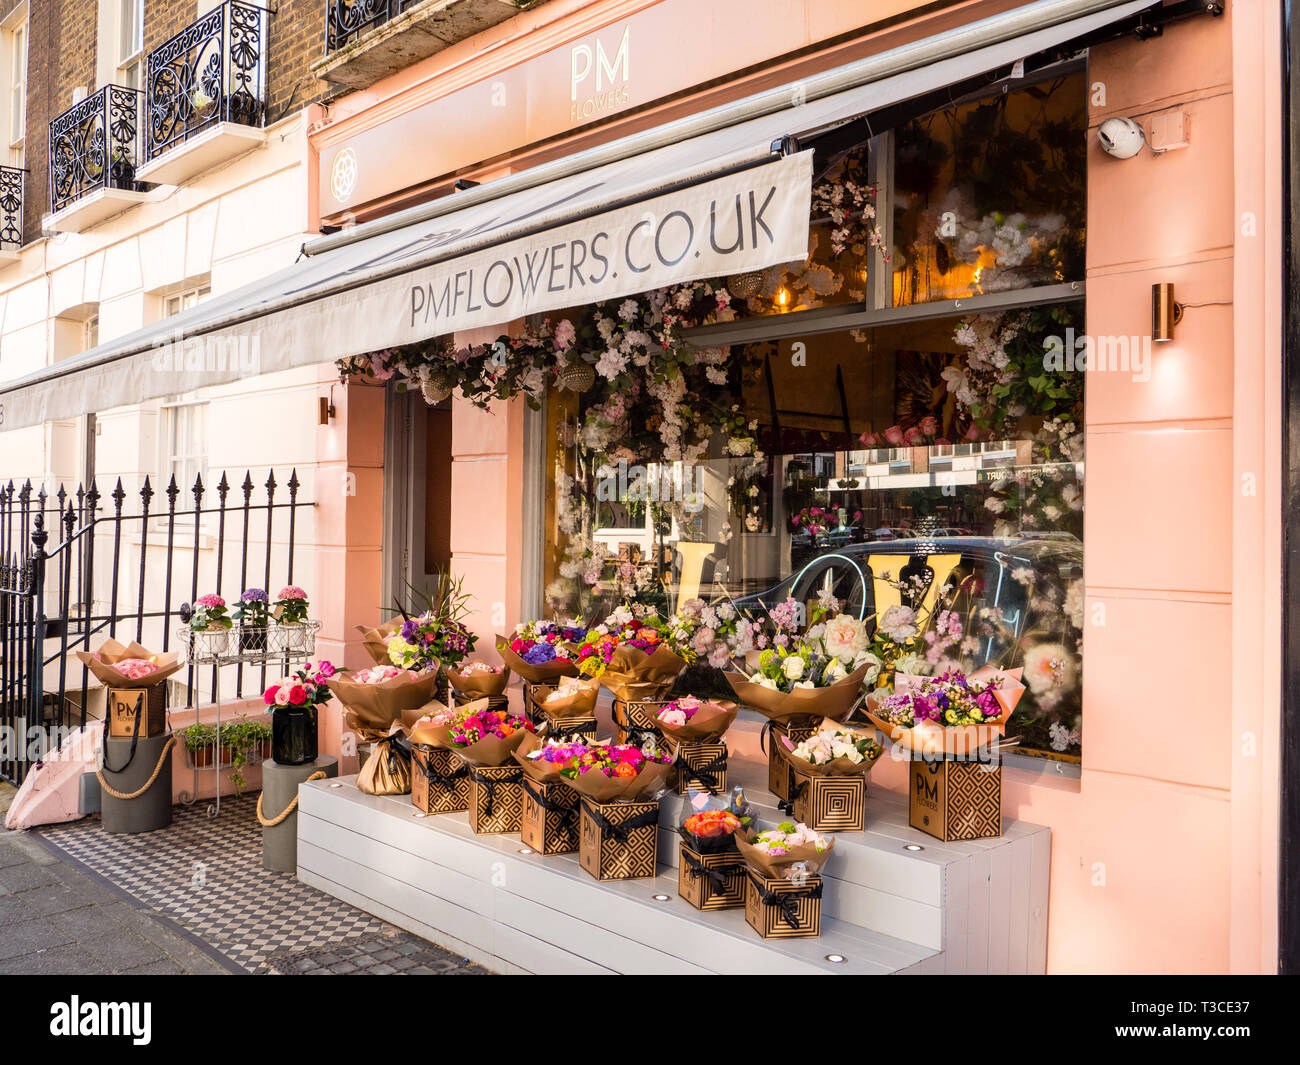 Luxury Flower Shop, PM Flowers, Connaught Village, Westminster, London, England, UK, GB. Stock Photo